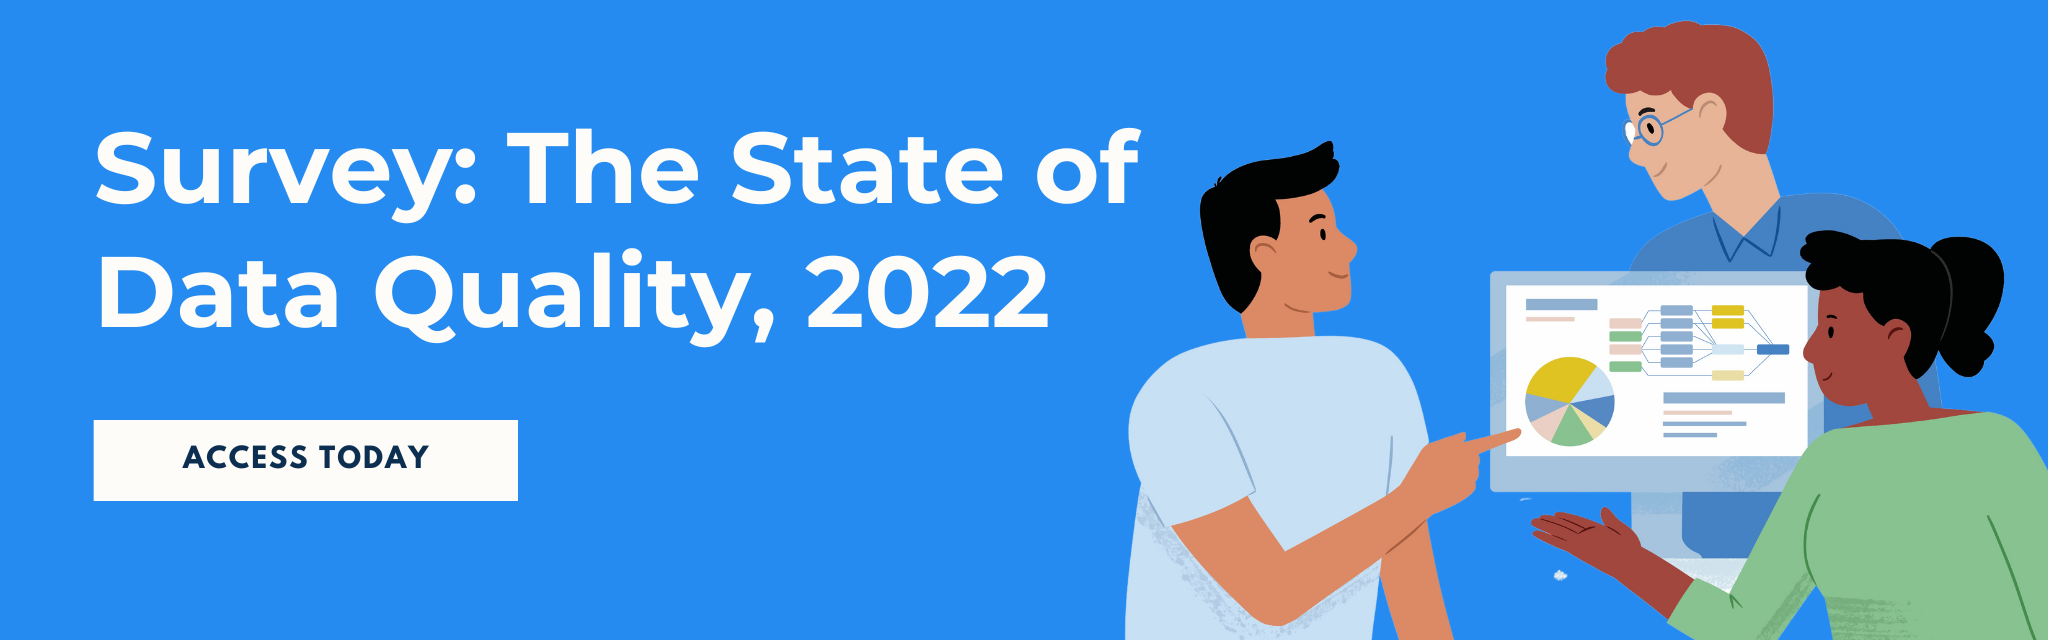 Survey: State of Data Quality